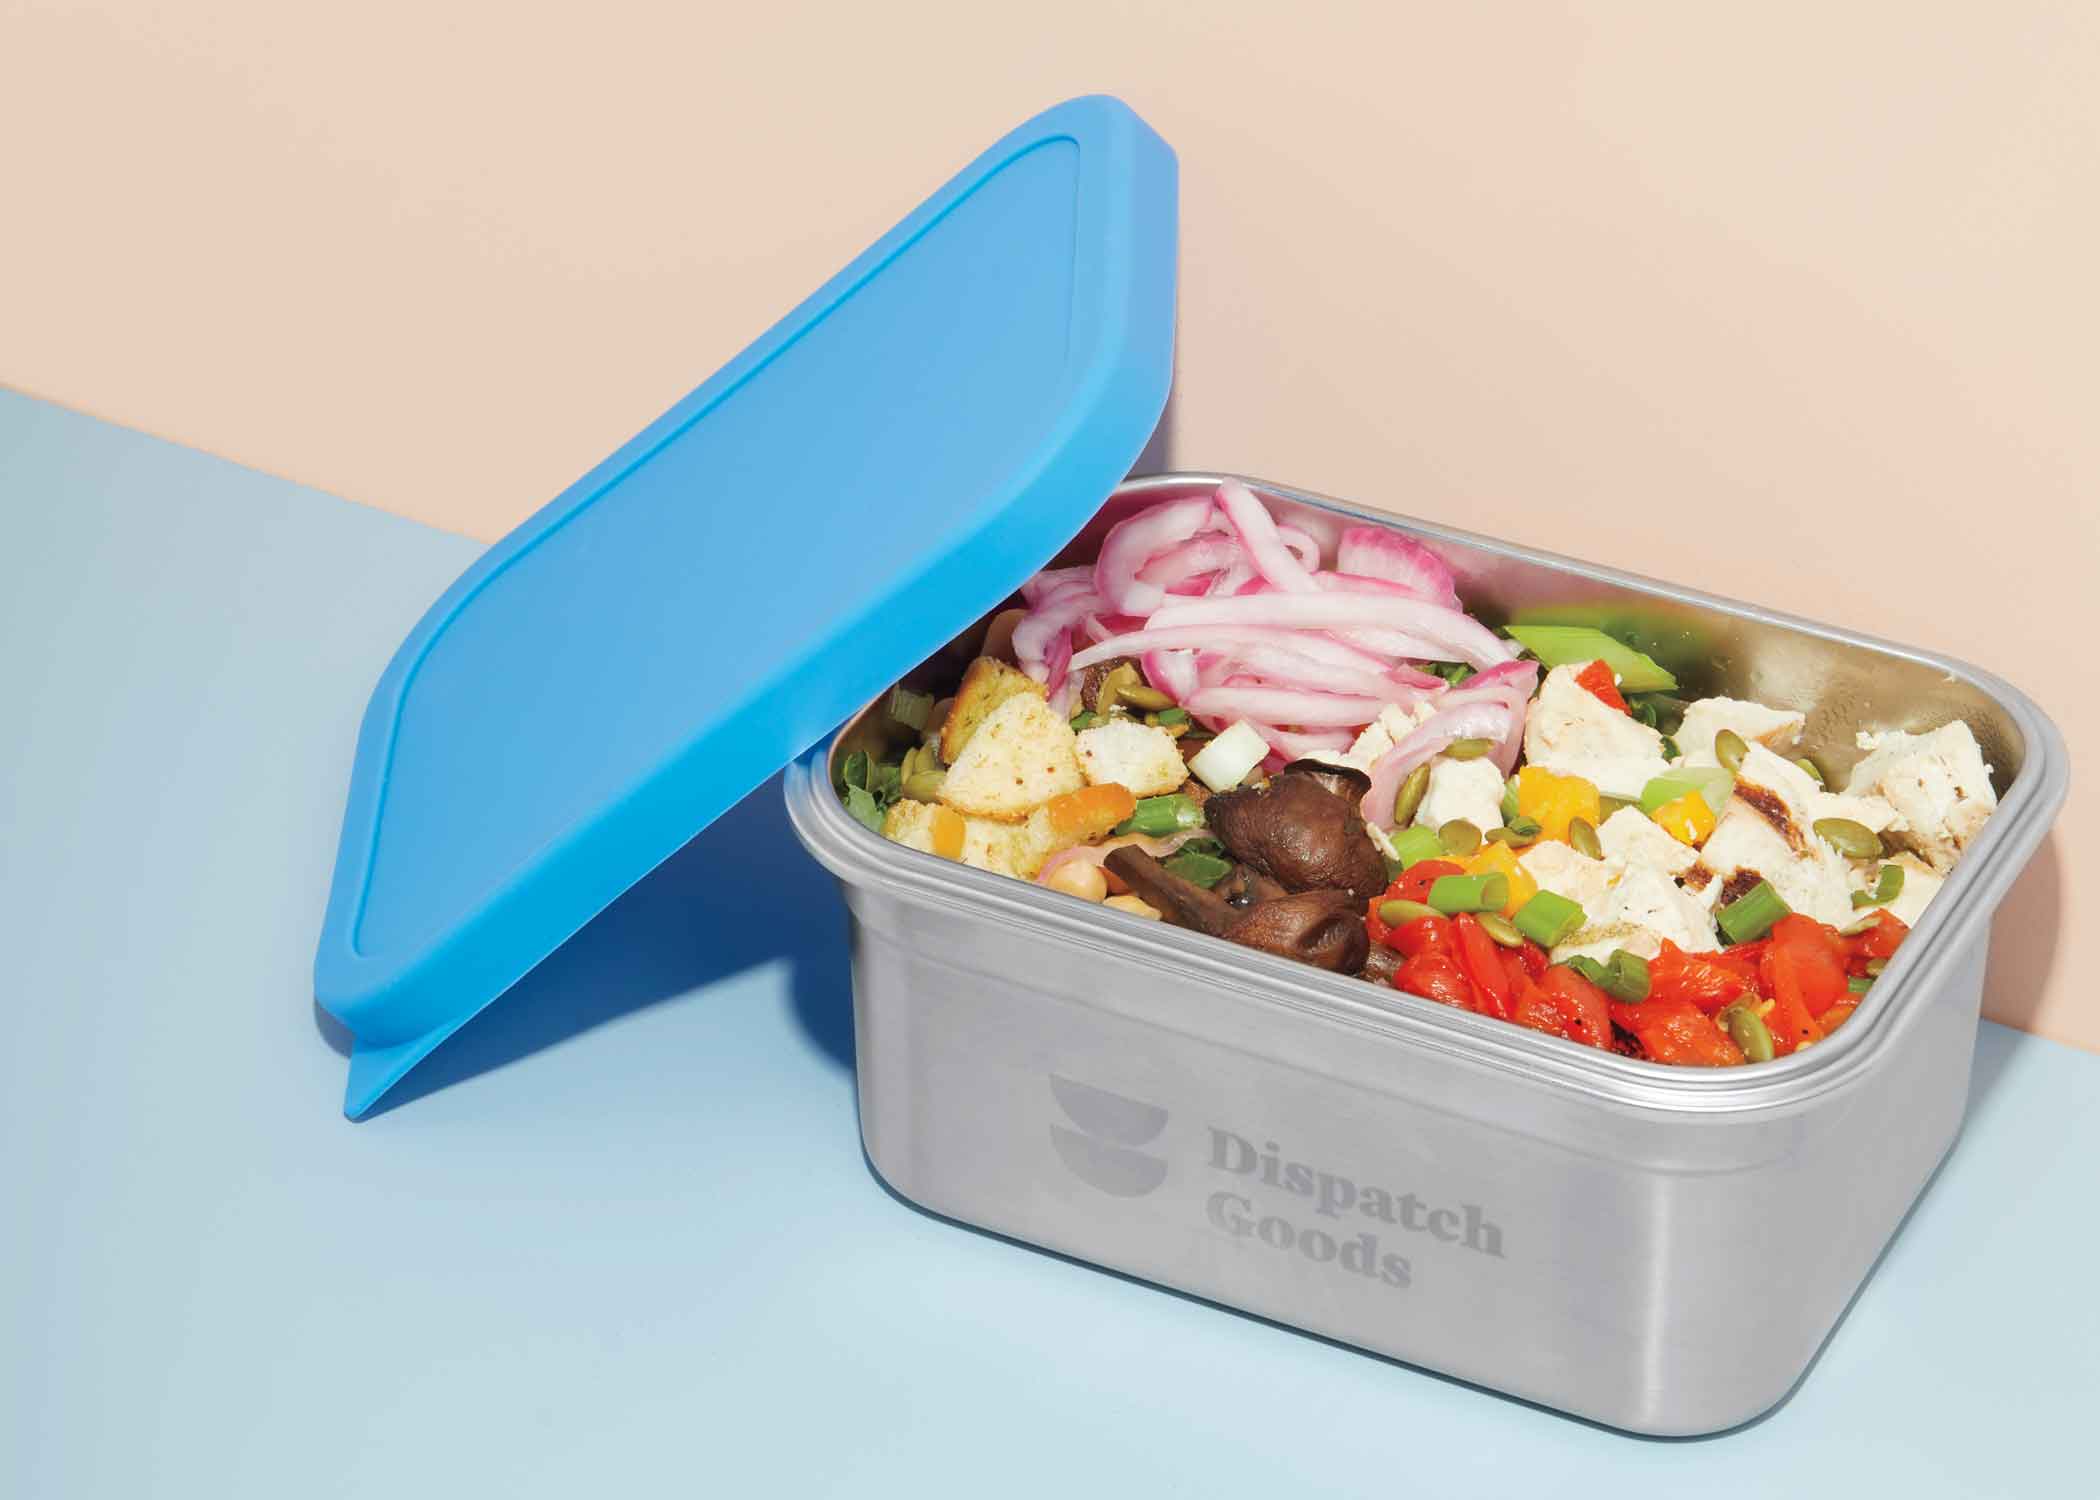 Dispatch Goods food container